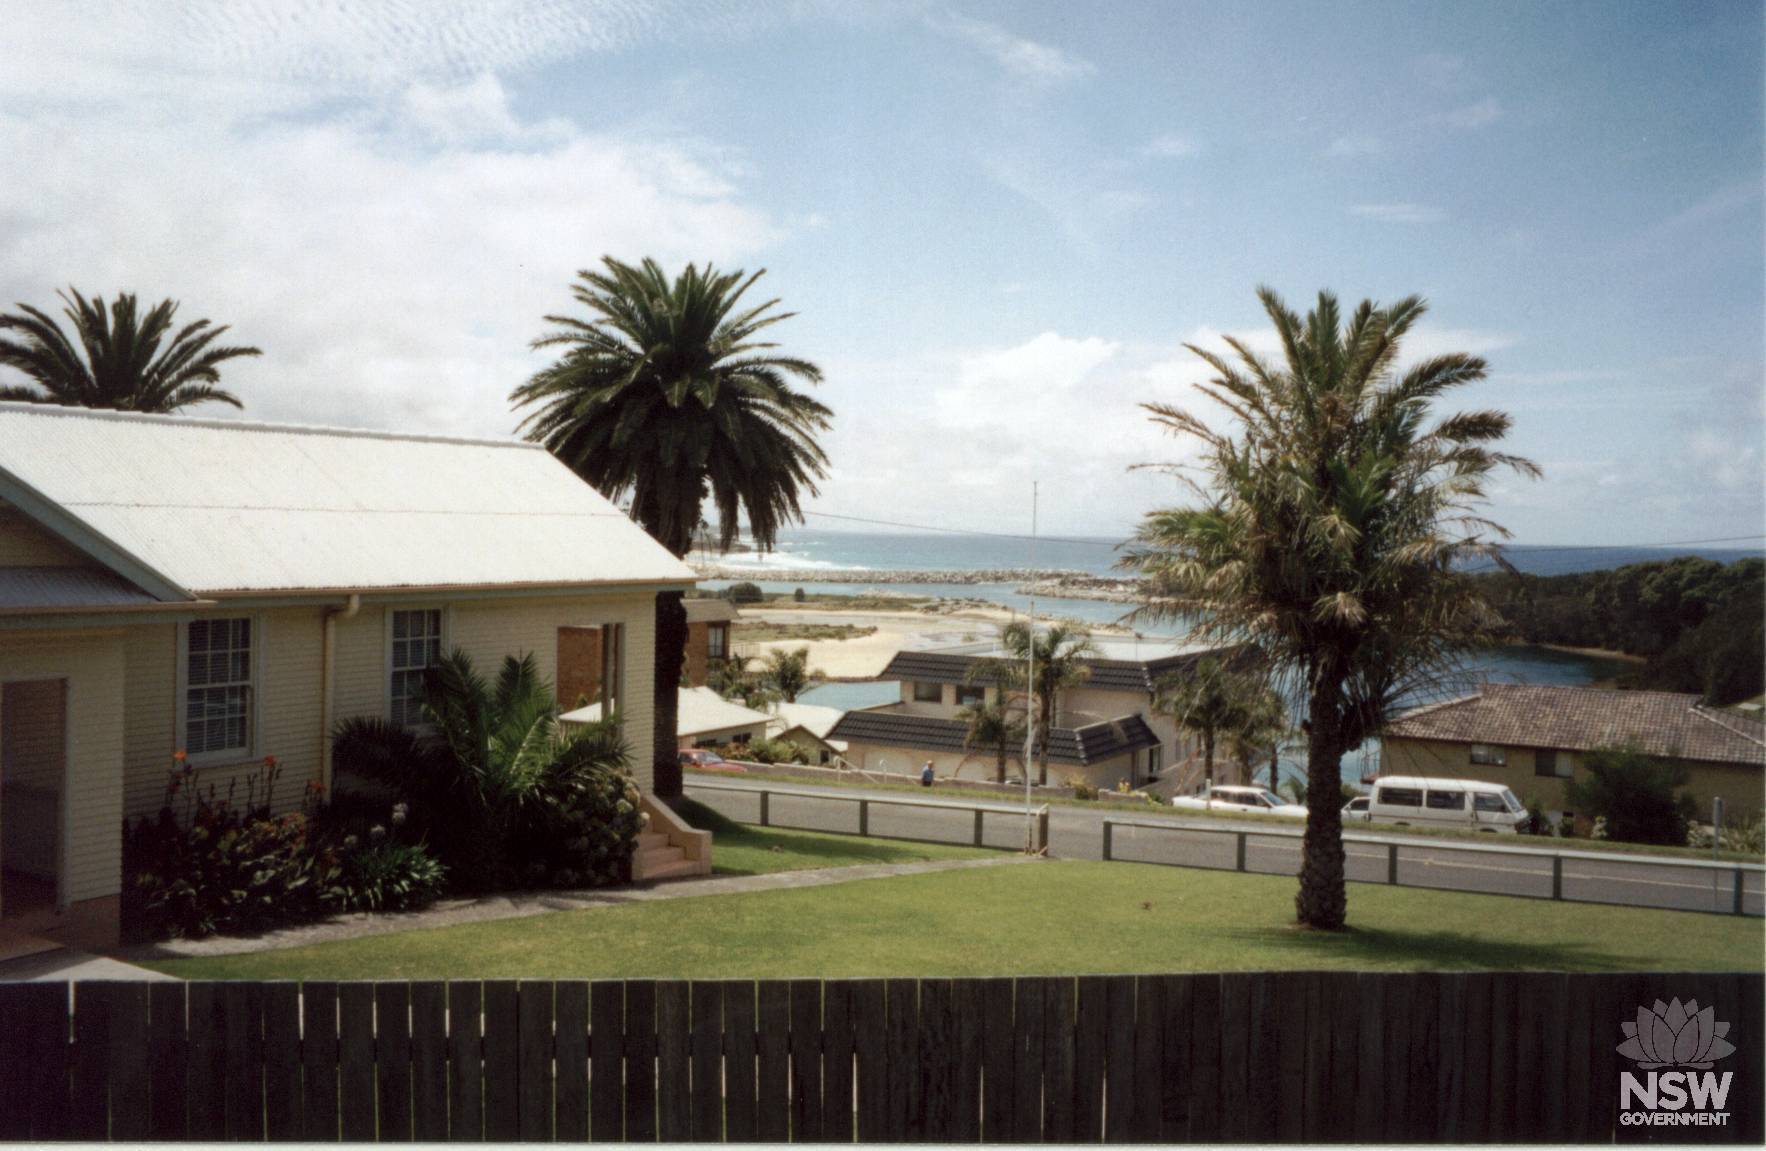 View of Narooma Courthouse in its coastal setting.